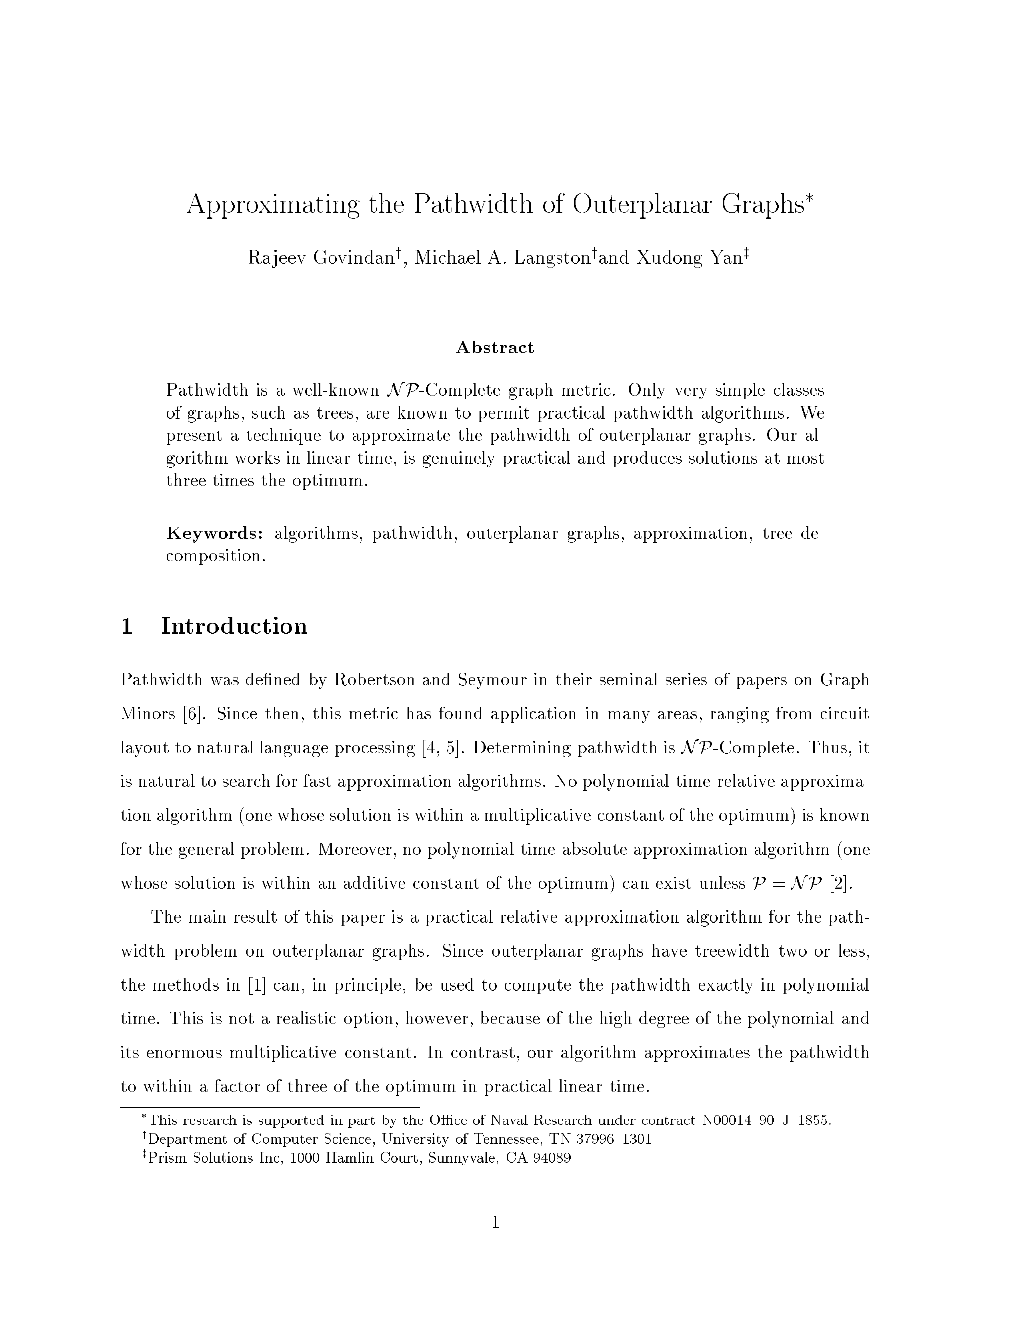 Approximating the Pathwidth of Outerplanar Graphs 1 Introduction